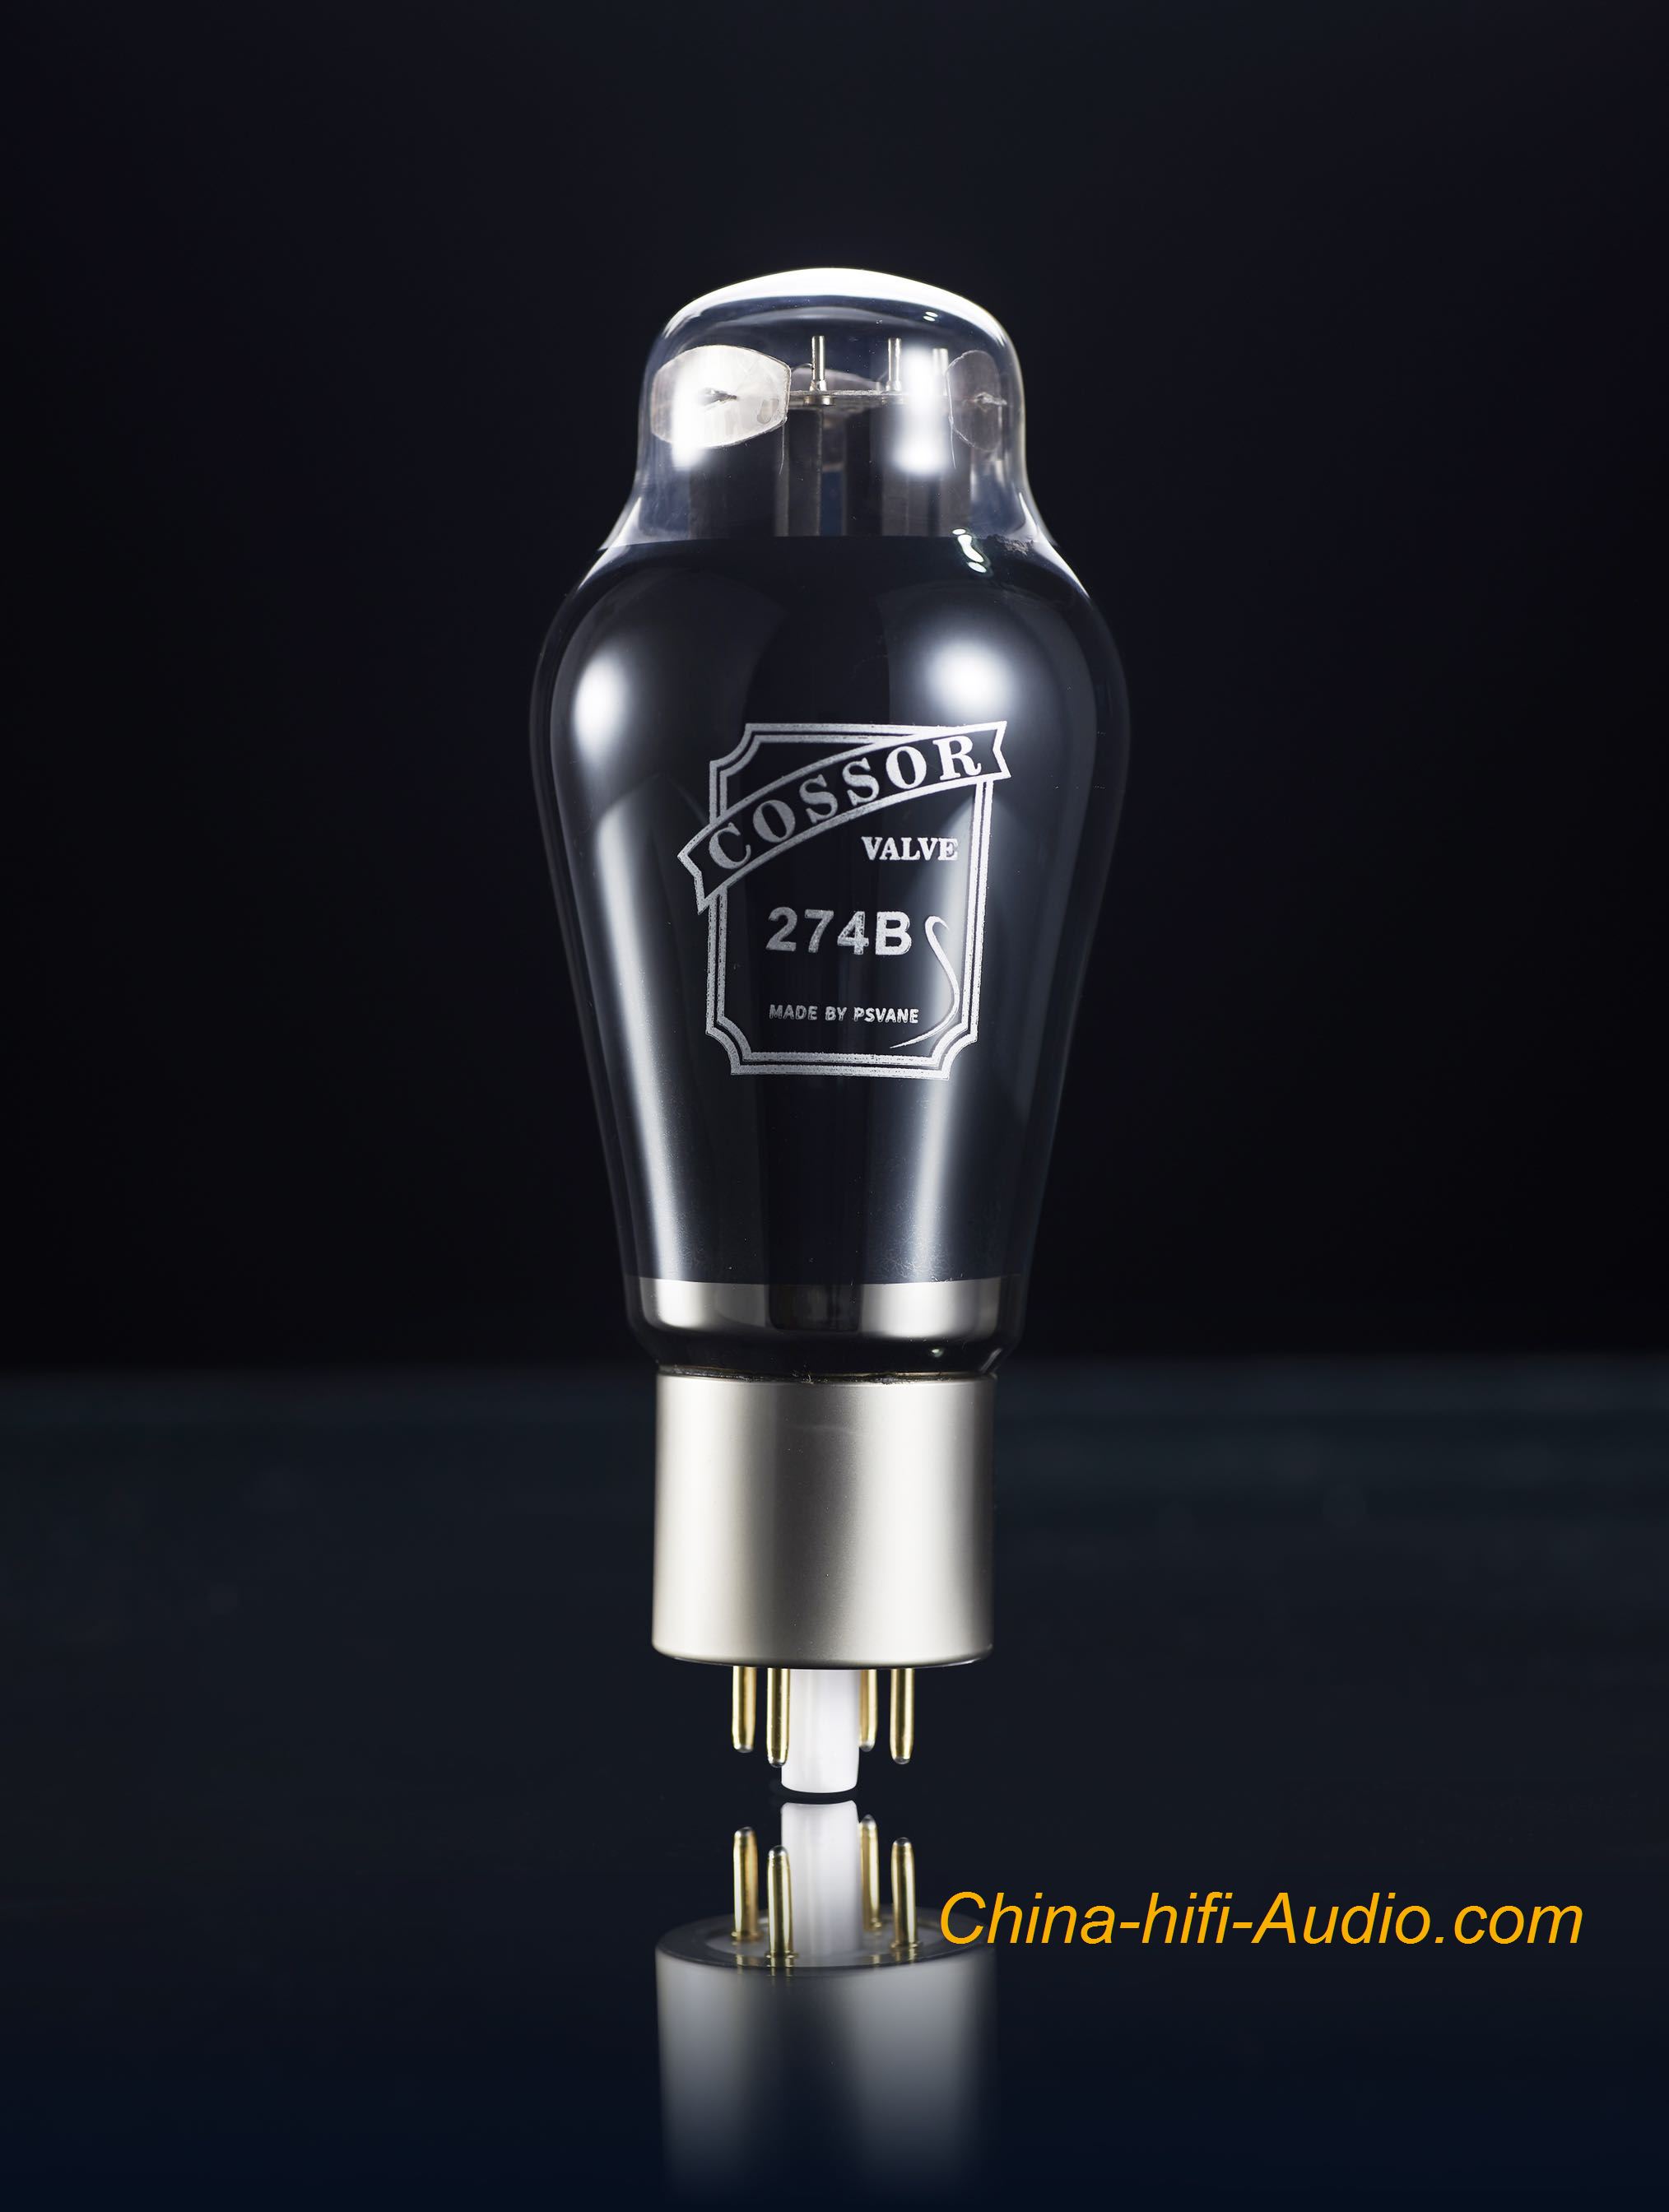 COSSOR VALVE 274B made by PSVANE Hi-end Vacuum tubes best matched One